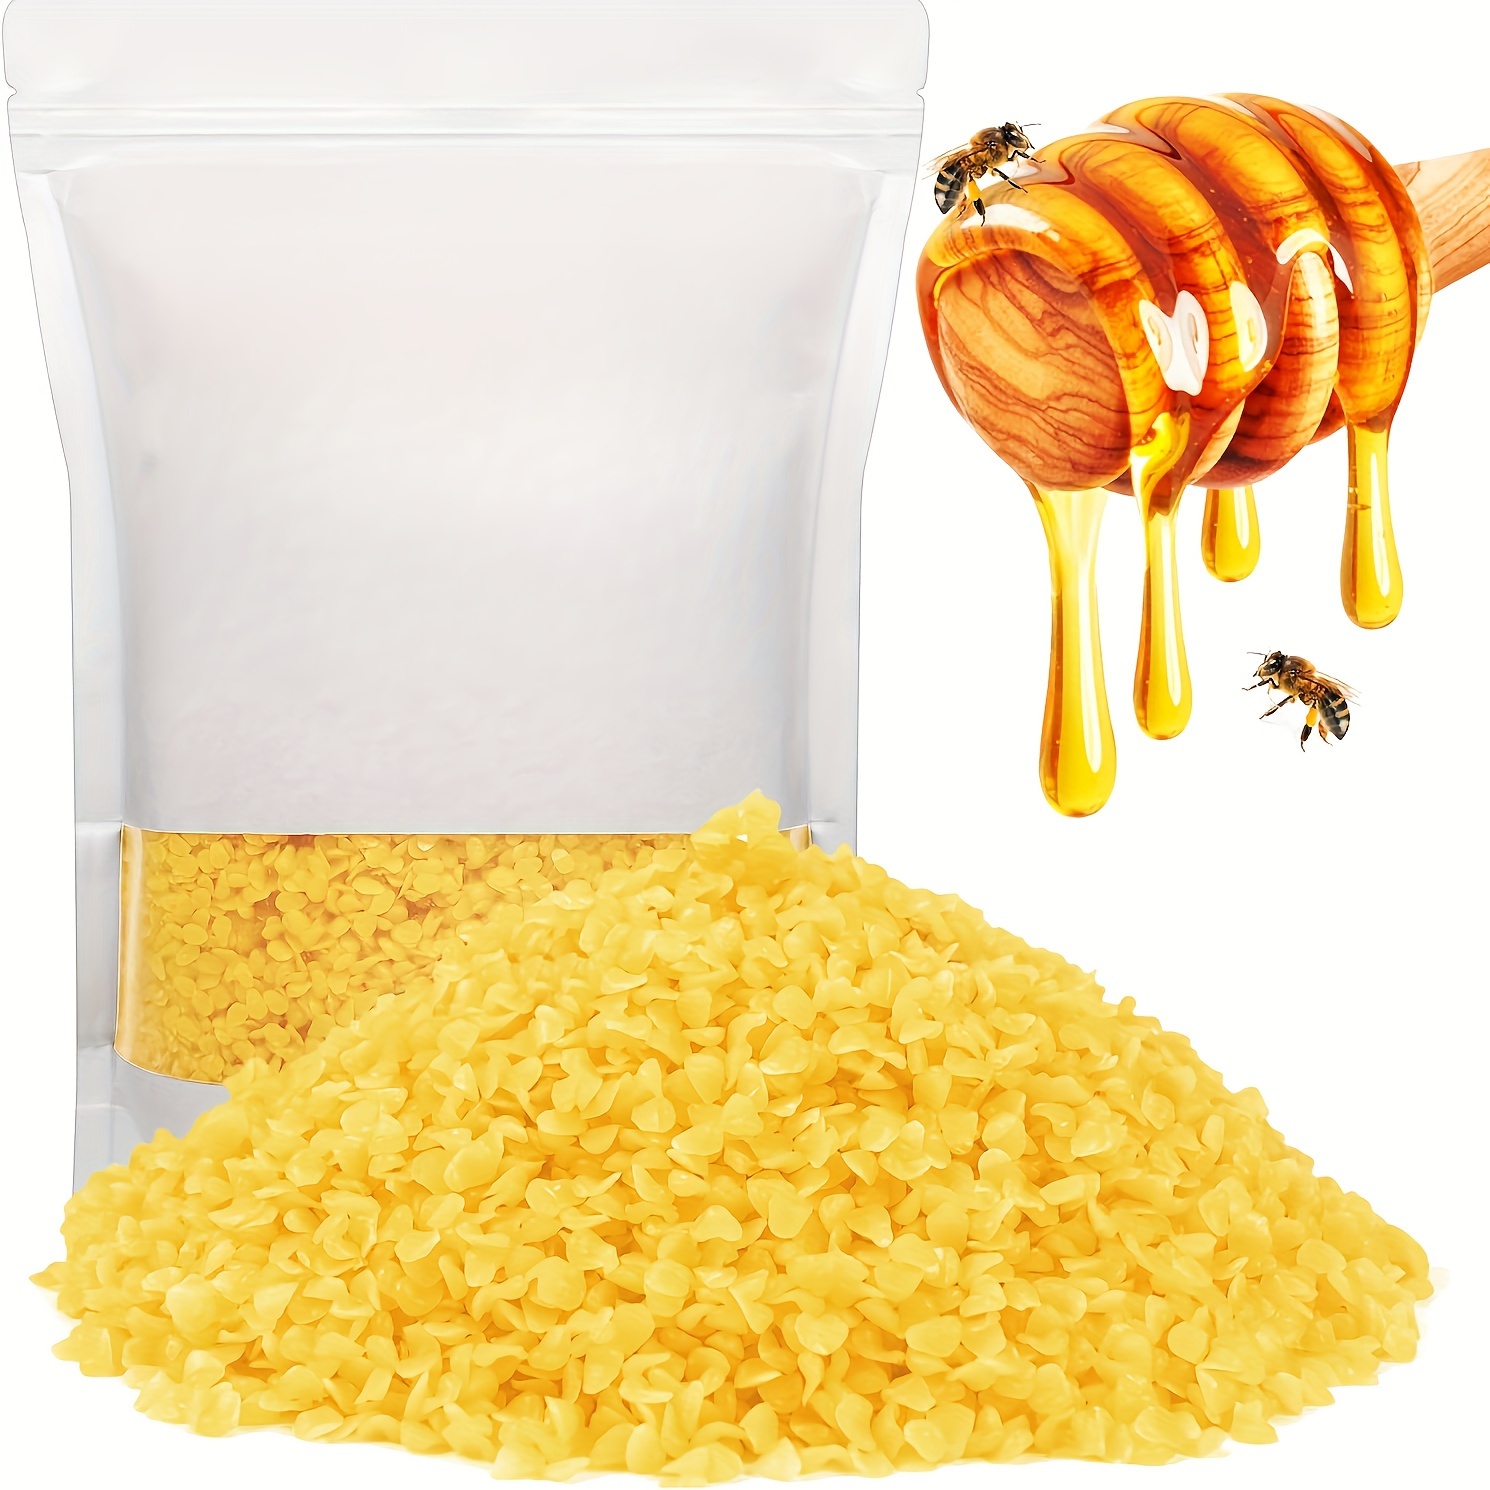  5LB Yellow Beeswax Pellets Food Grade Beeswax Triple Filtered  Beeswax for Candle Making Beeswax Pastilles for DIY Creams Lotions Lip Balm  Soap